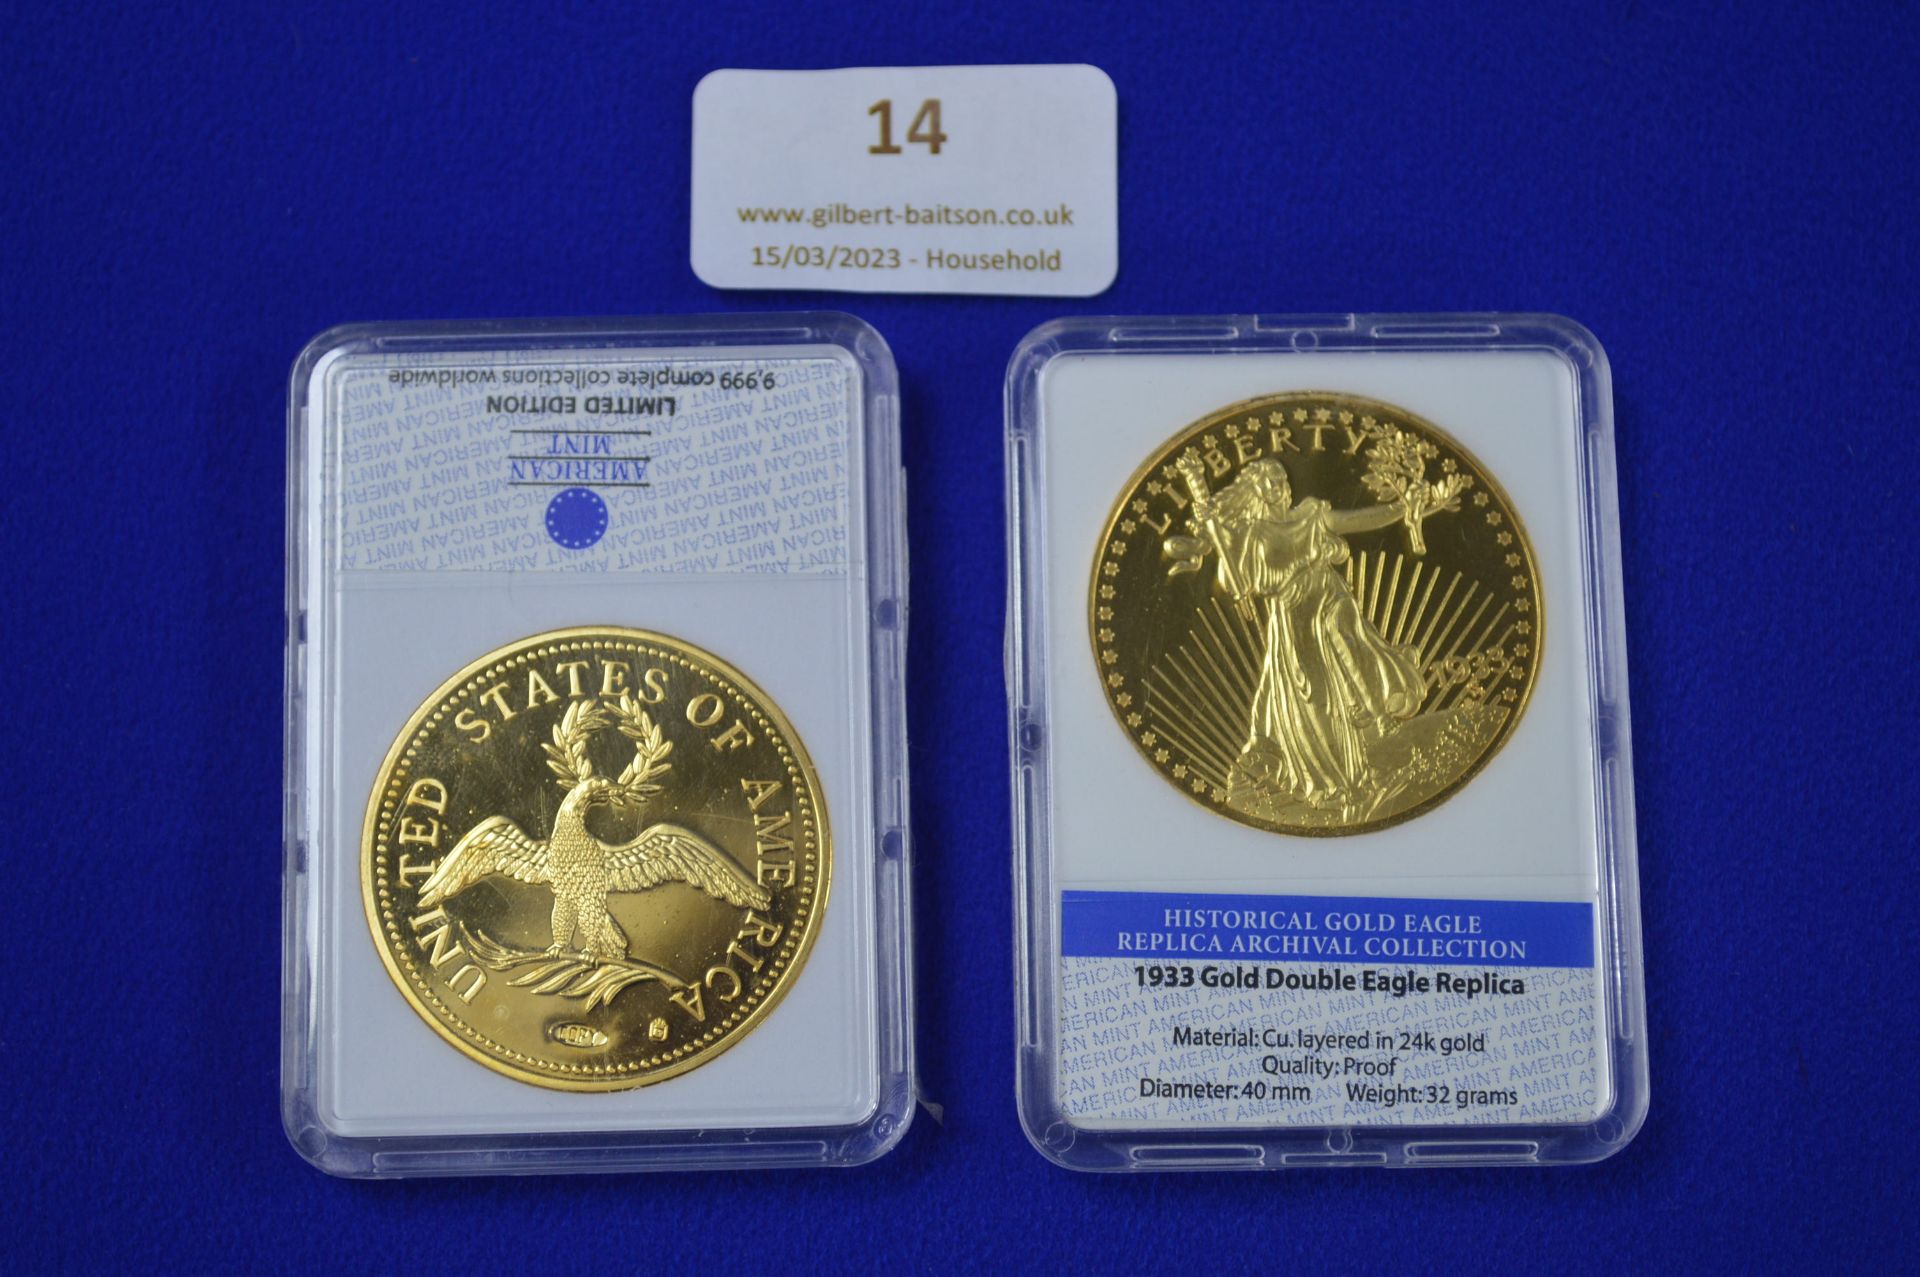 Two Gold Plated Replica Eagle American Coins - Image 3 of 3